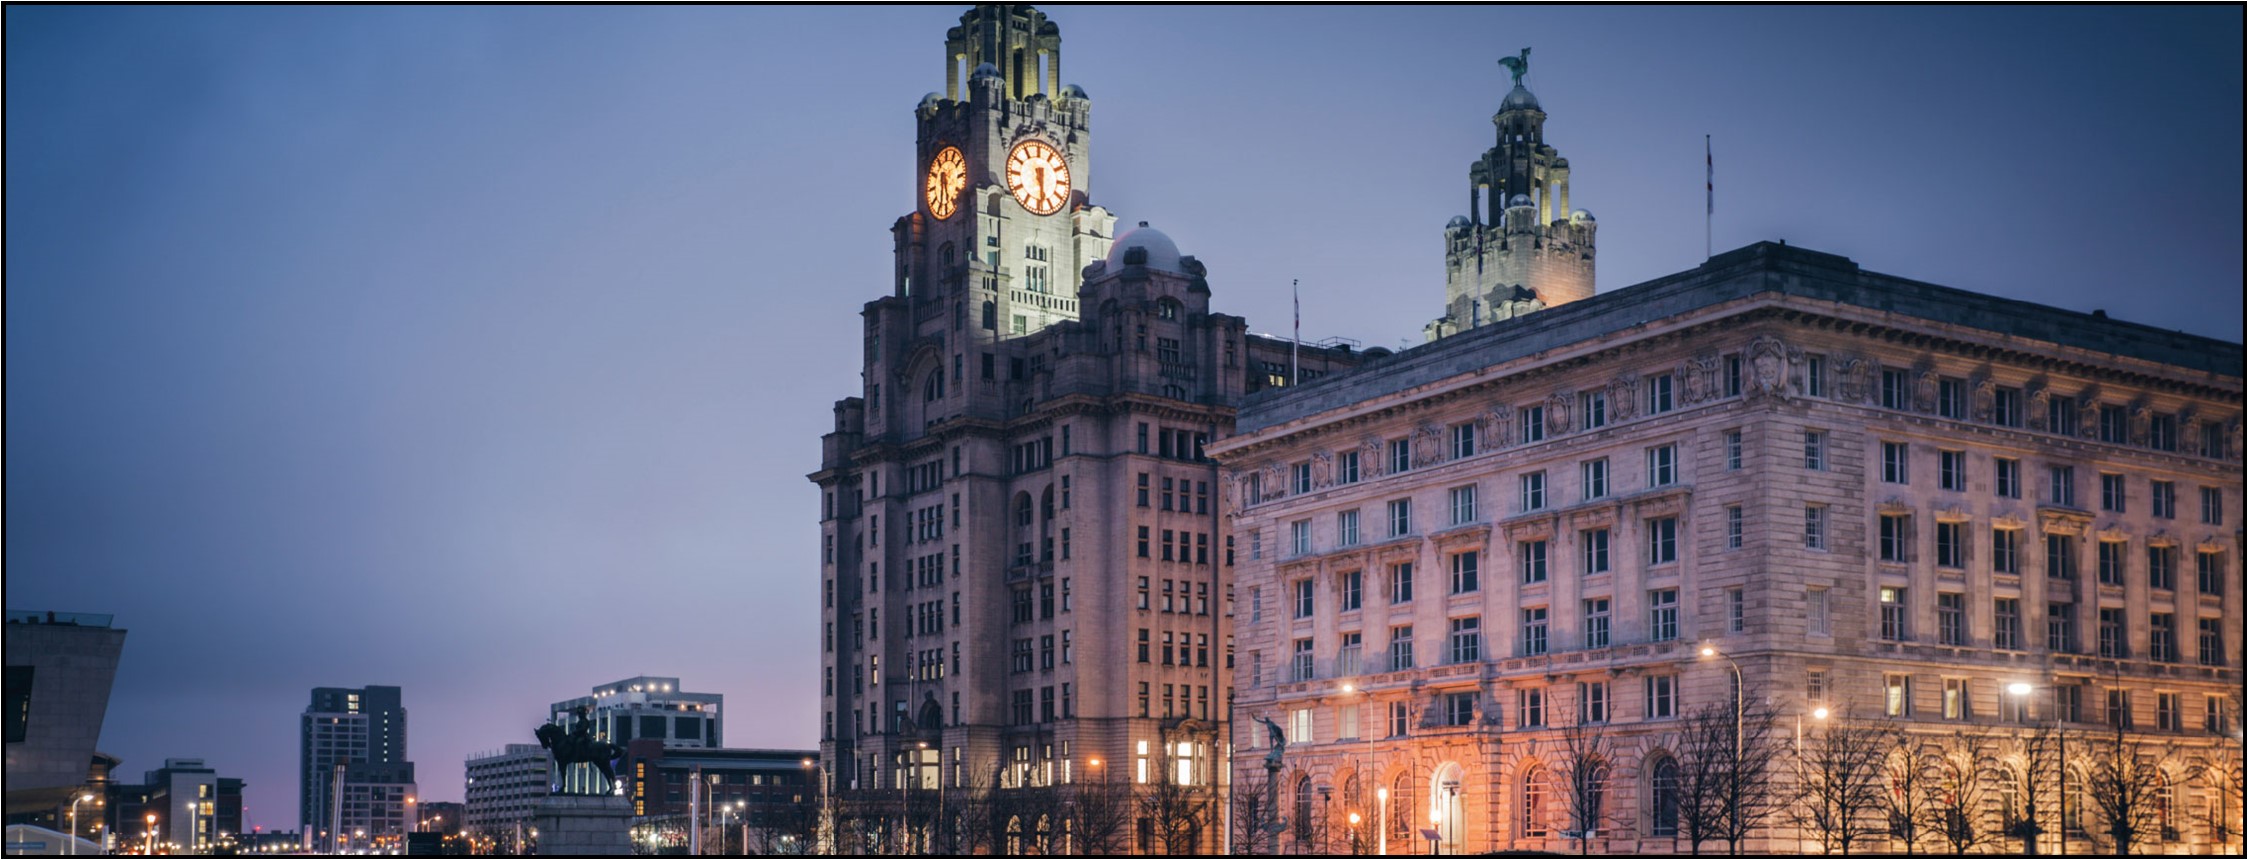  Building Maintenance, Facilities and Repairs Manager Jobs, Careers and Vacancies in Liverpool, Merseyside, North West England. Advertised by AWD online – Multi-Job Board Advertising and CV Sourcing Recruitment Services